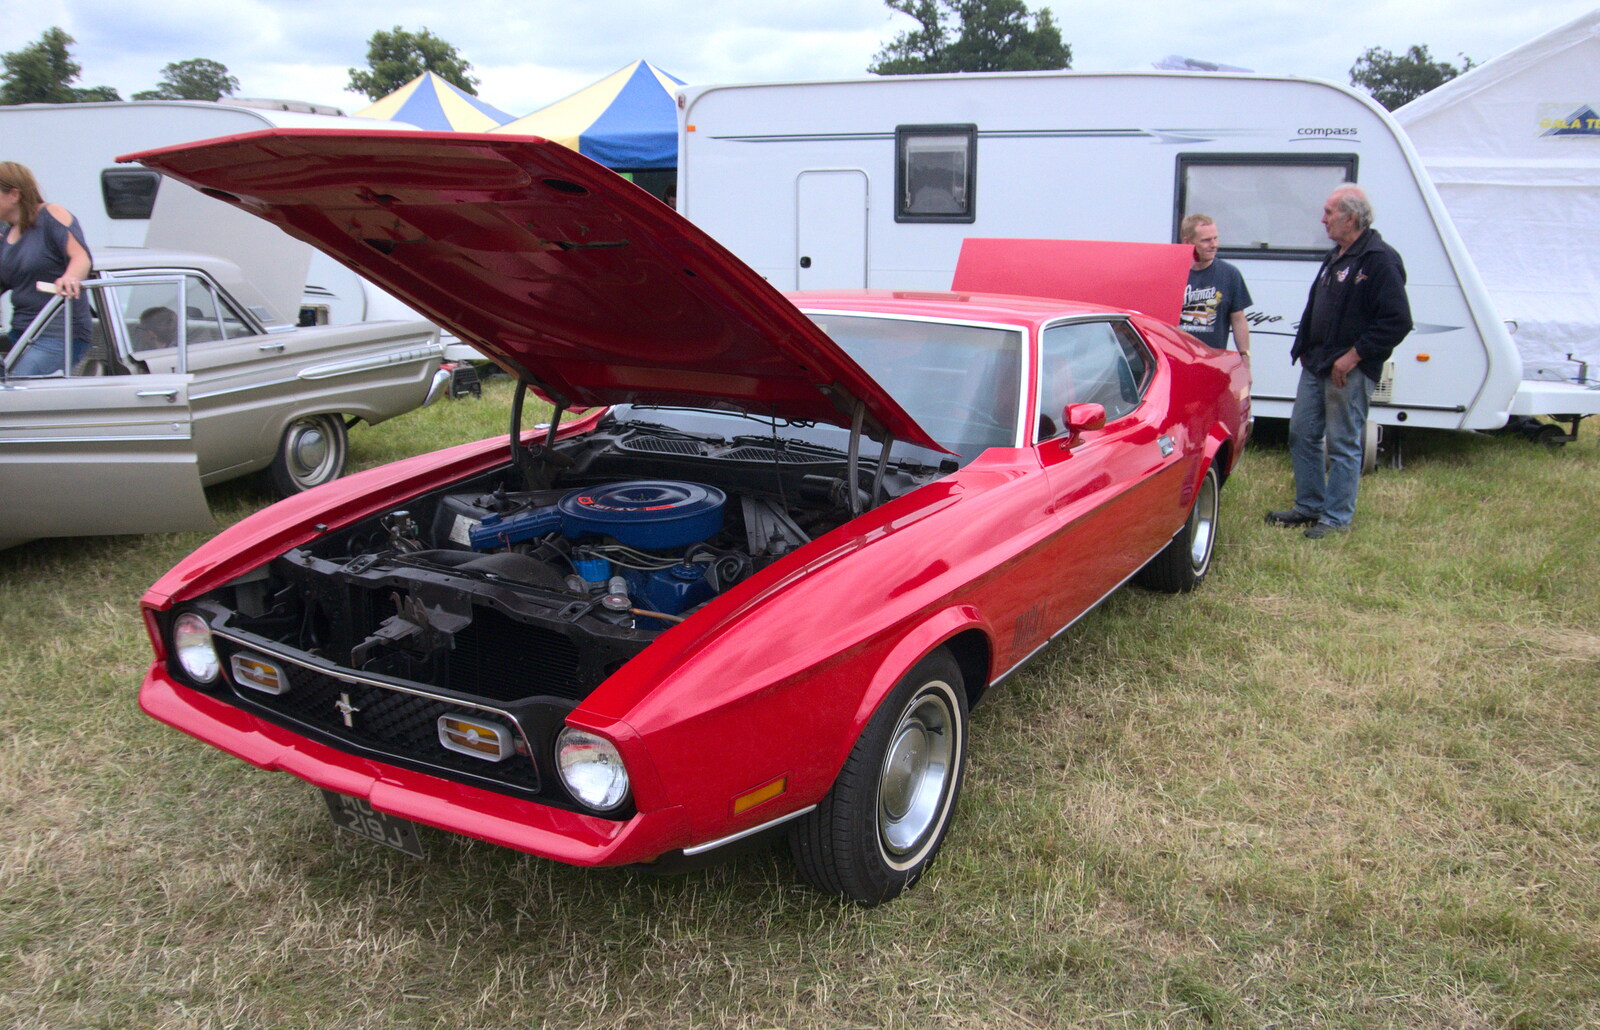 Paul Clay's vintage Ford Mustang from The Formerly-Known-As-The-Eye-Show, Palgrave, Suffolk - 17th June 2018